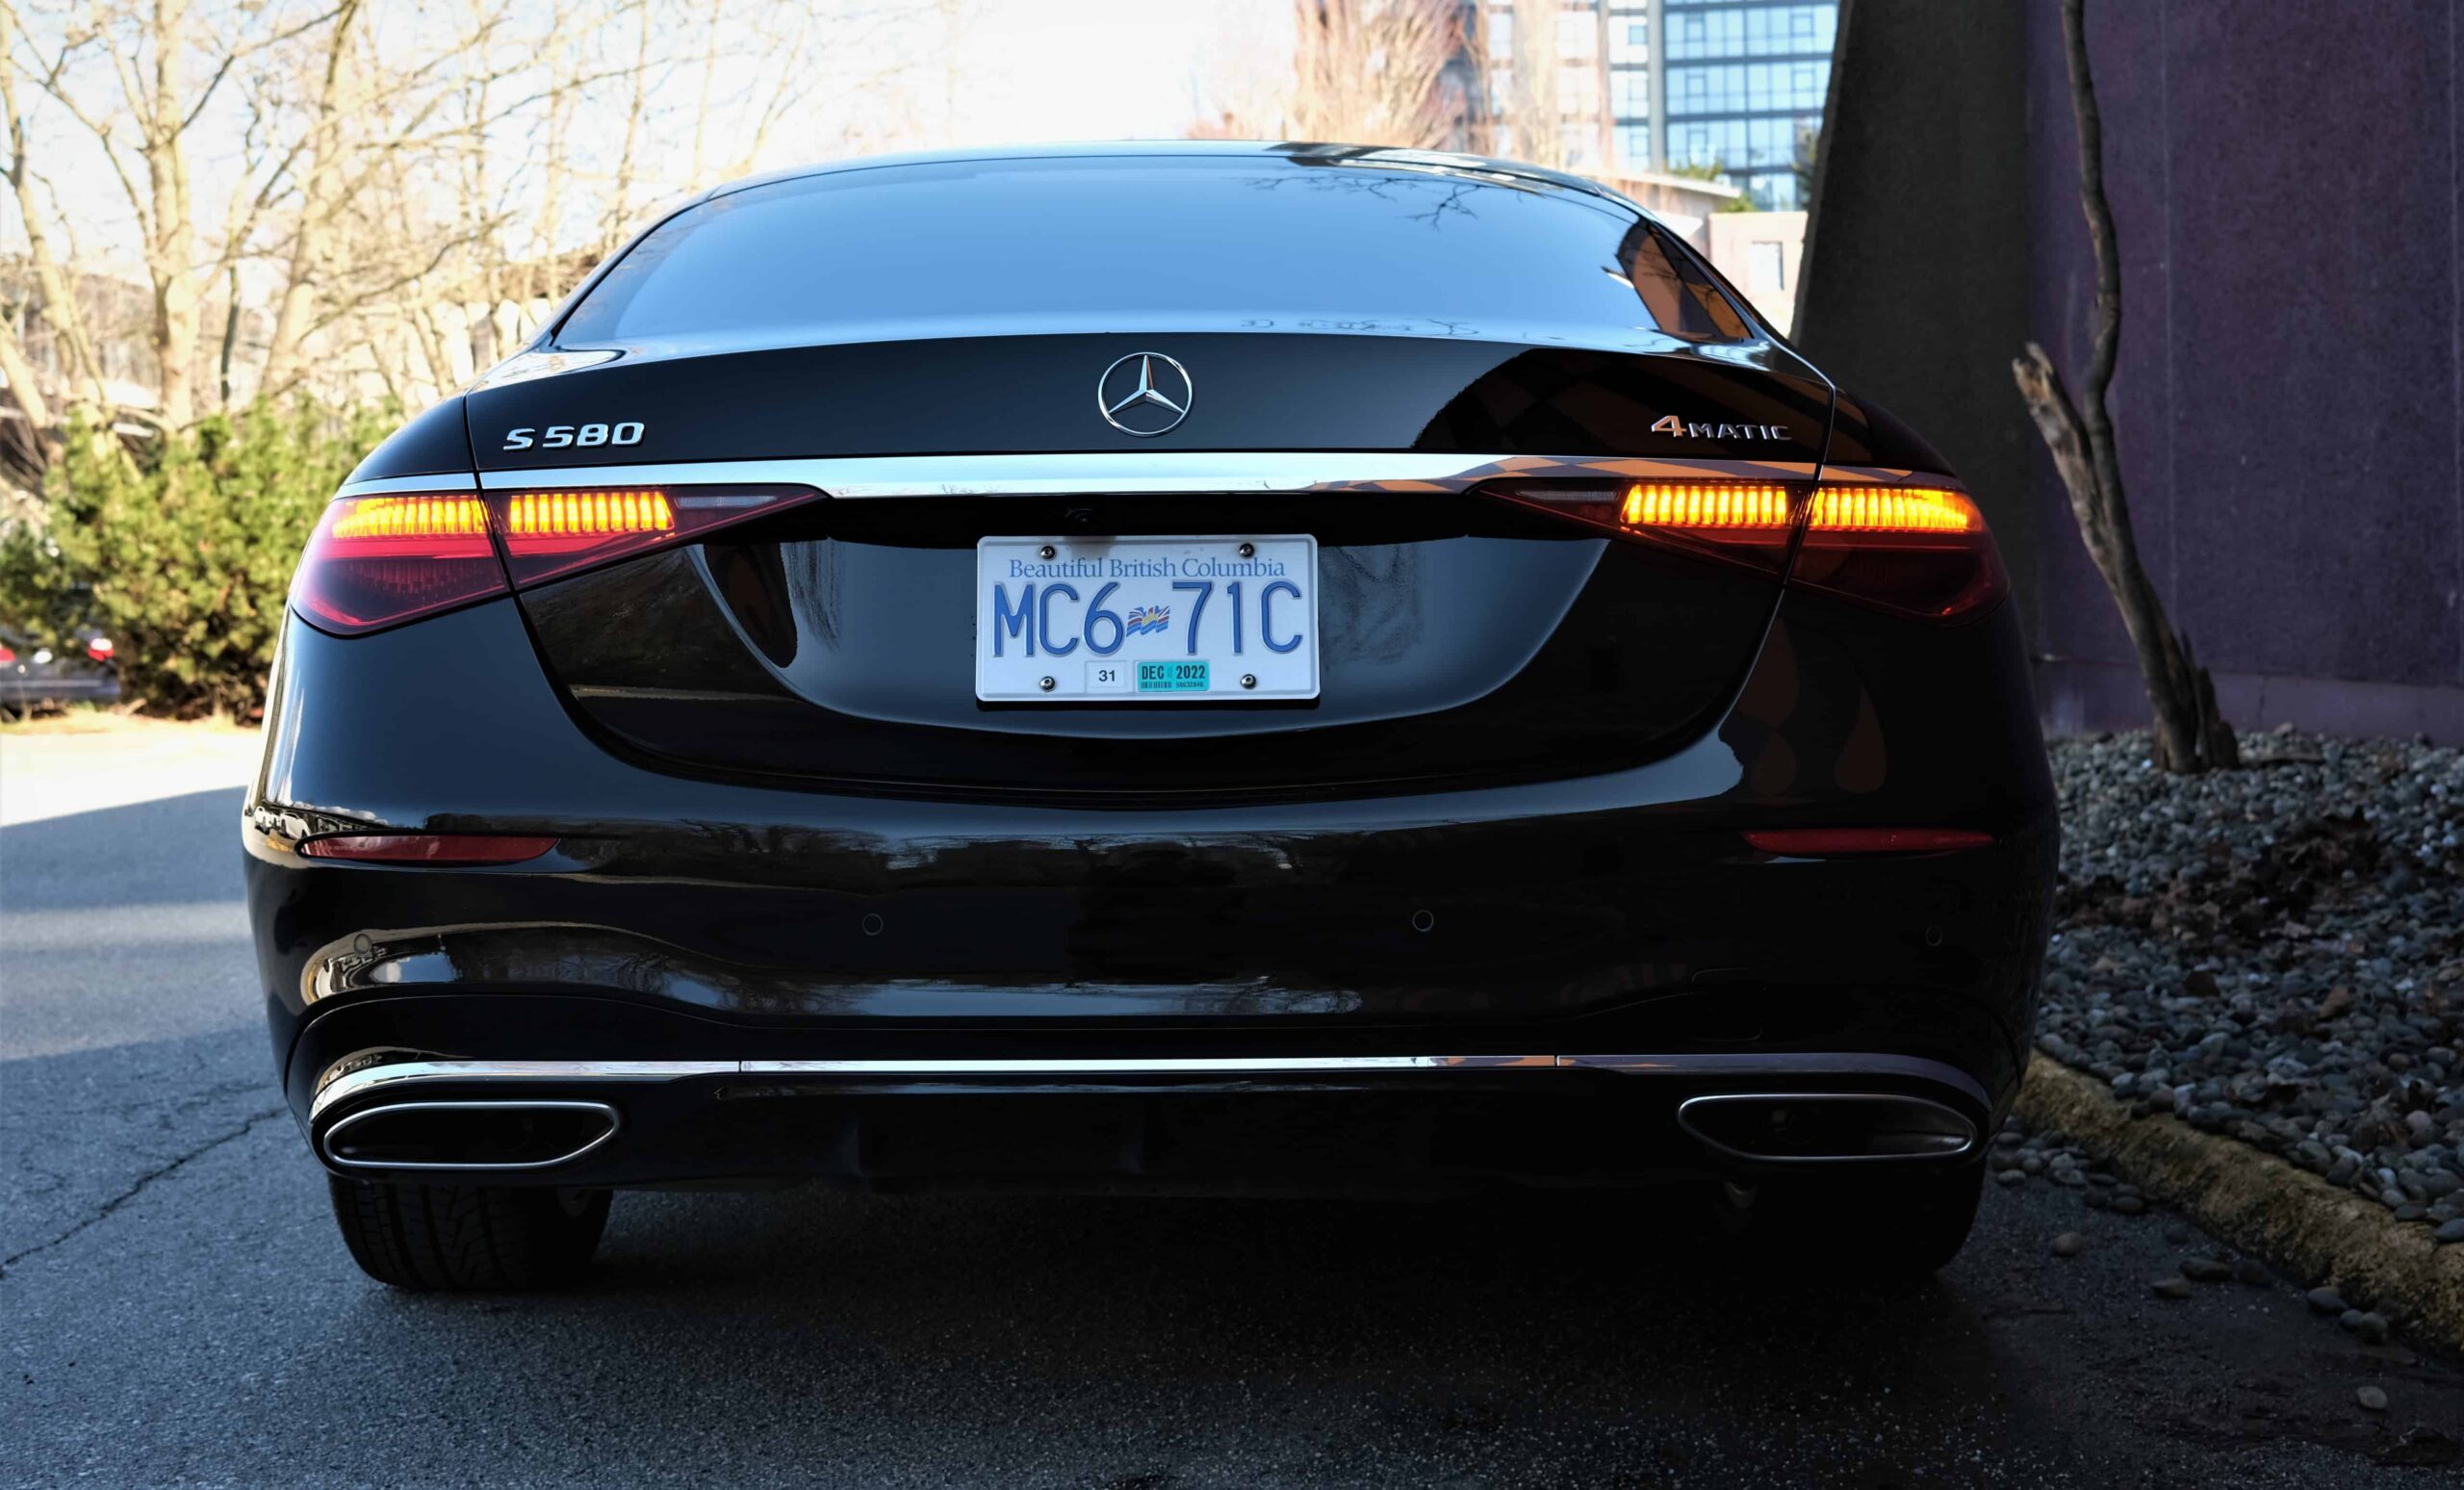 2022 Mercedes Benz S580 Rear scaled